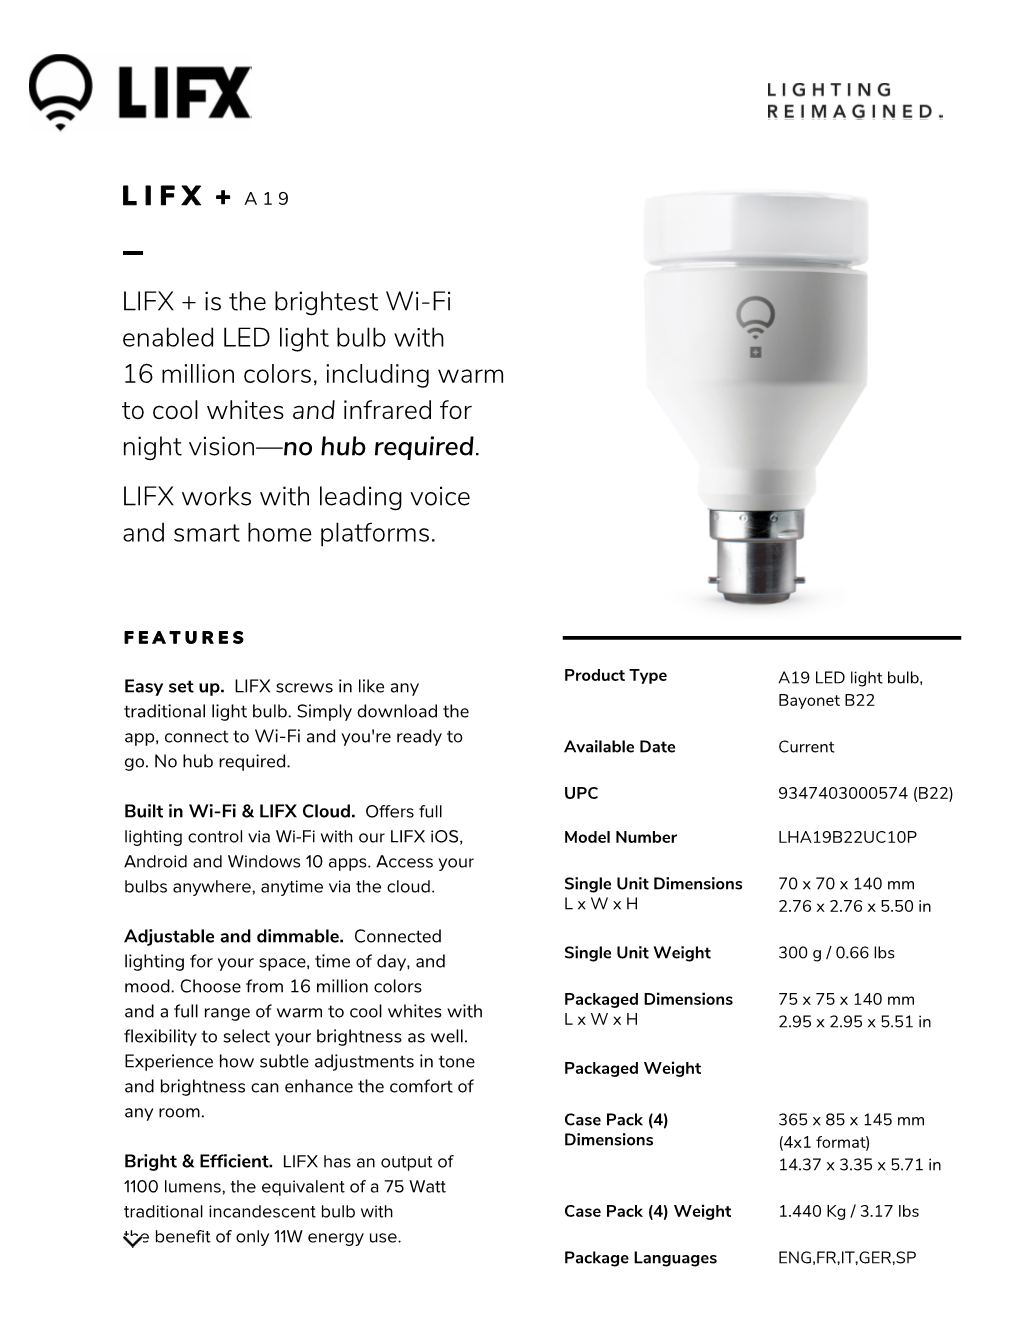 LIFX + Is the Brightest Wi-Fi Enabled LED Light Bulb with 16 Million Colors, Including Warm to Cool Whites and Infrared for Night Vision—No Hub Required